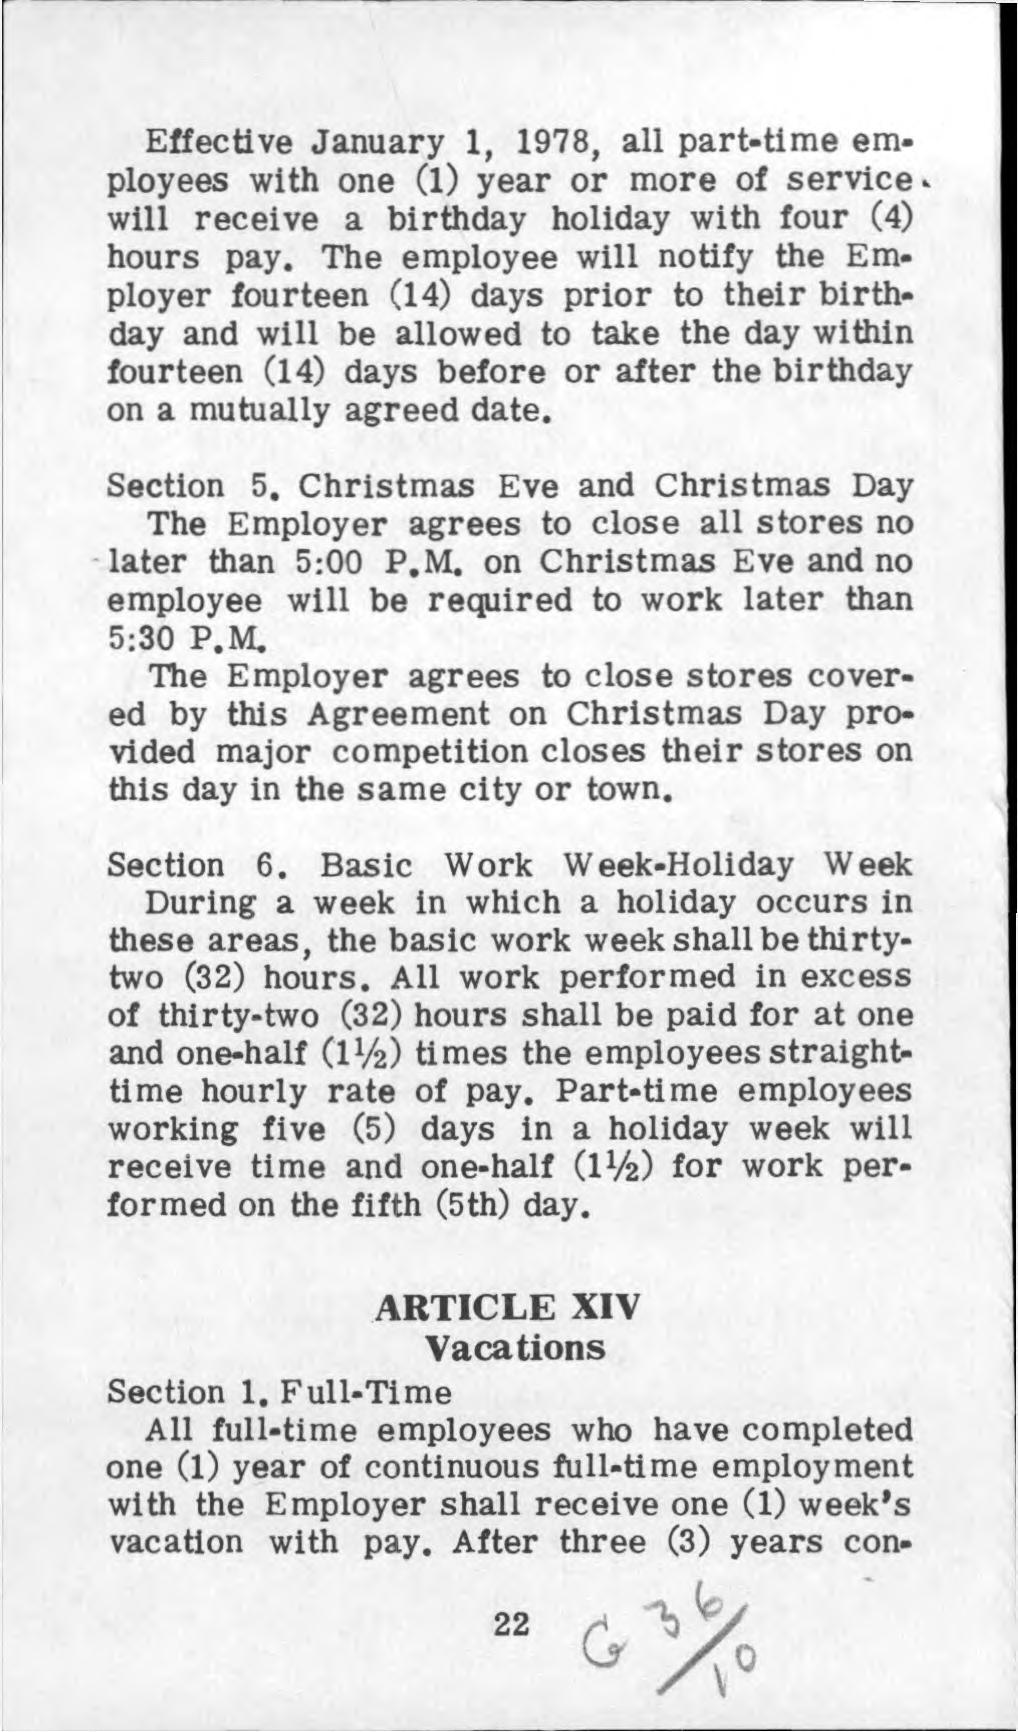 Effective January 1, 1978, all part-time employees with one (1) year or more of service will receive a birthday holiday with four (4) hours pay.